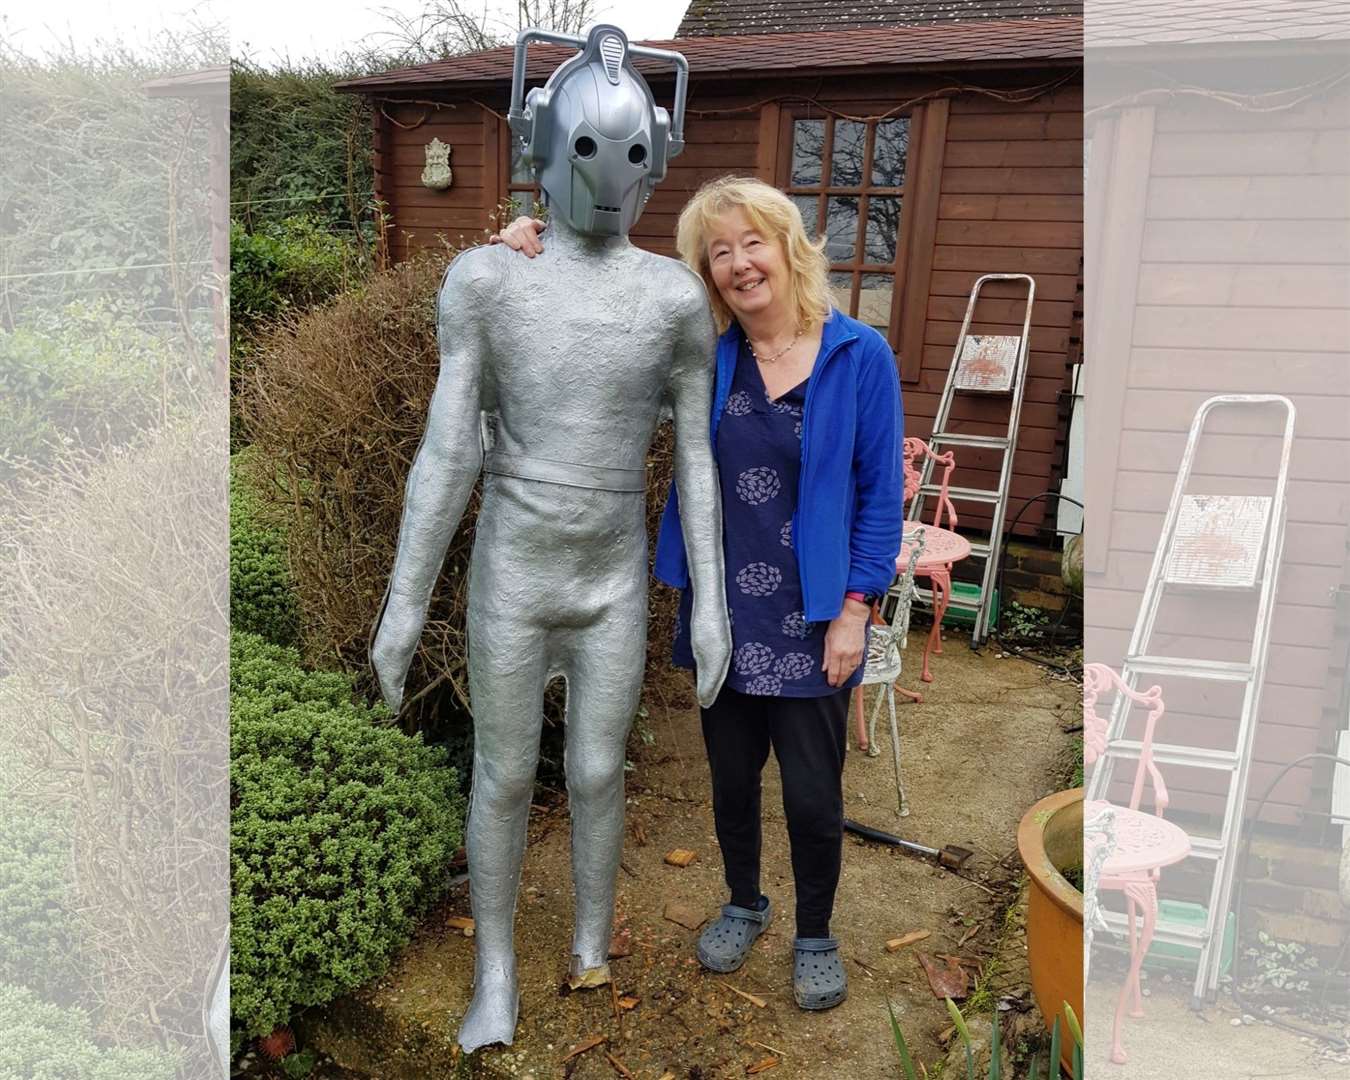 The Cyberman with Jacqui Kent